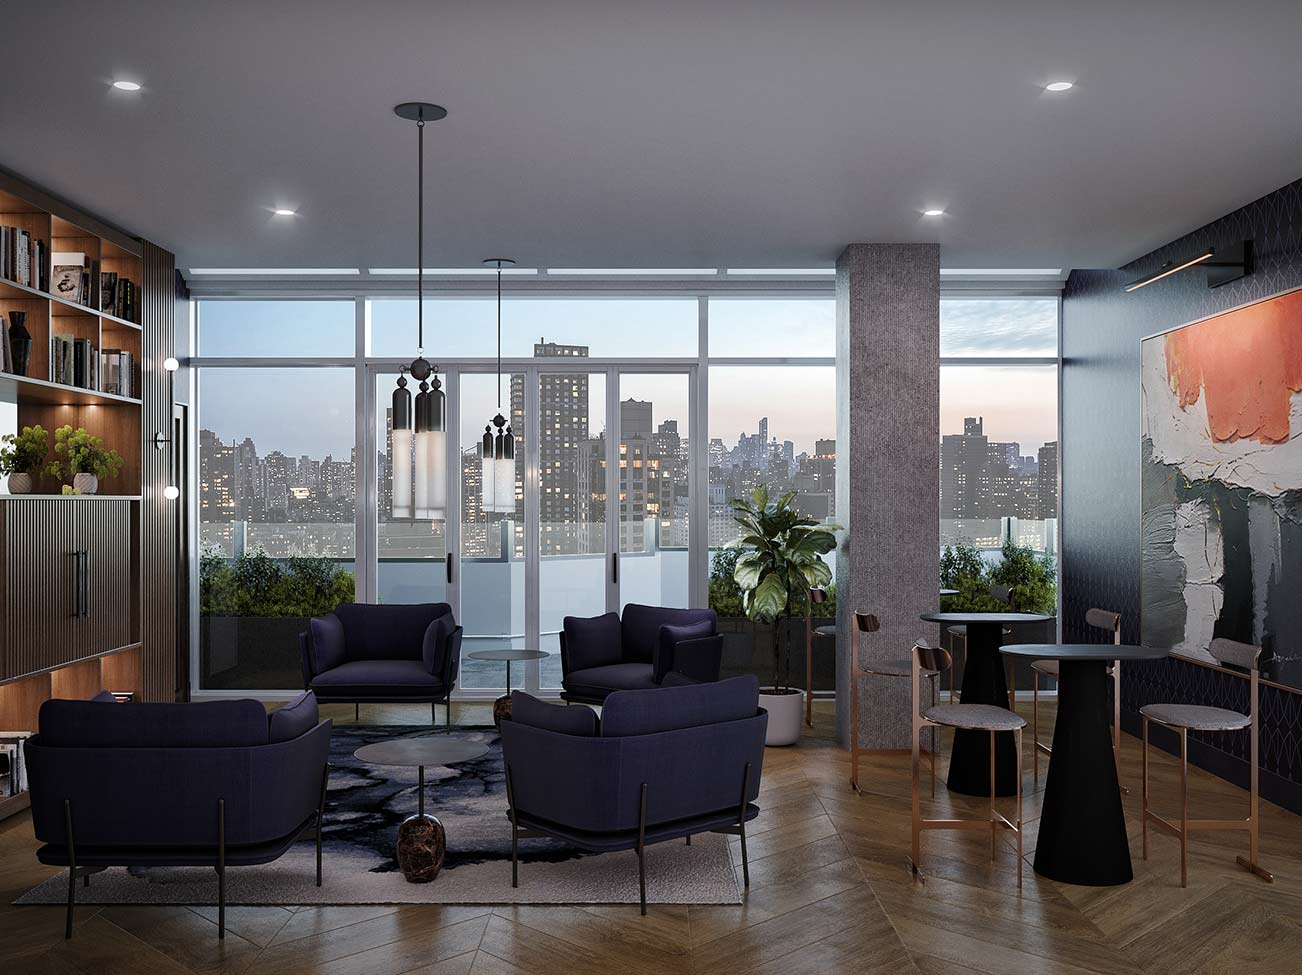 City views seen from floor-to-ceiling windows in a contemporary city apartment with modern furnishings and a deep blue accent wall.